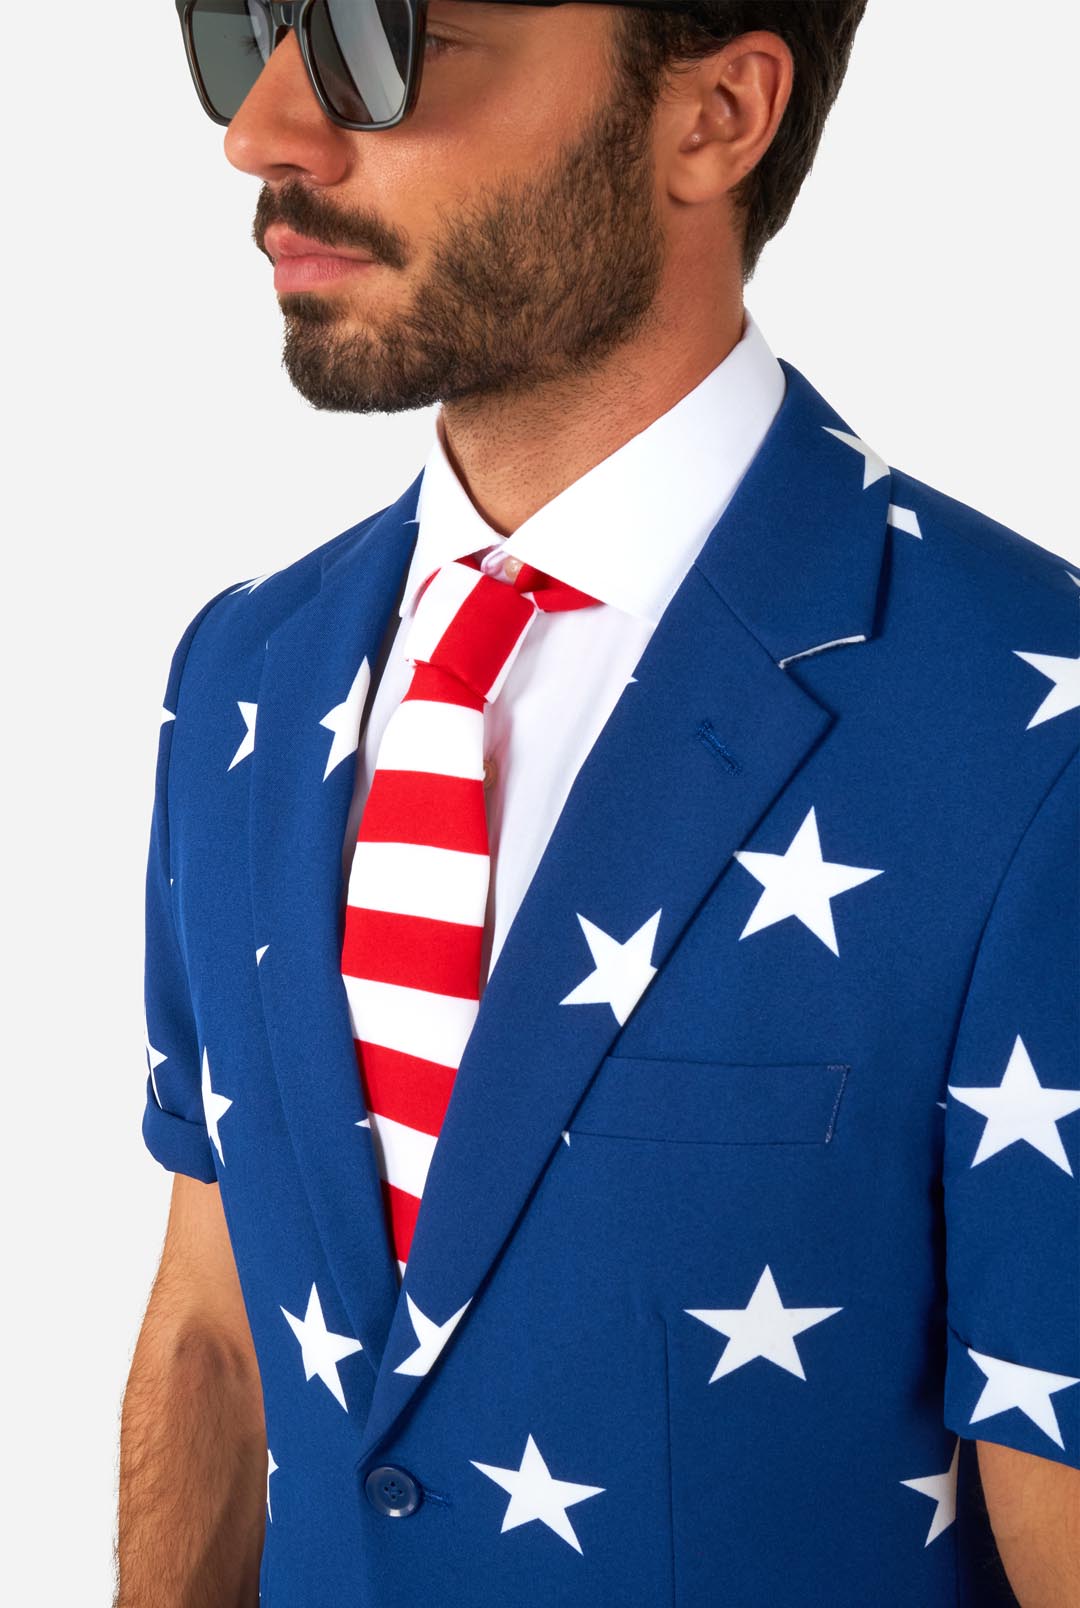 Summer Stars and Stripes, USA Flag Summer Suit